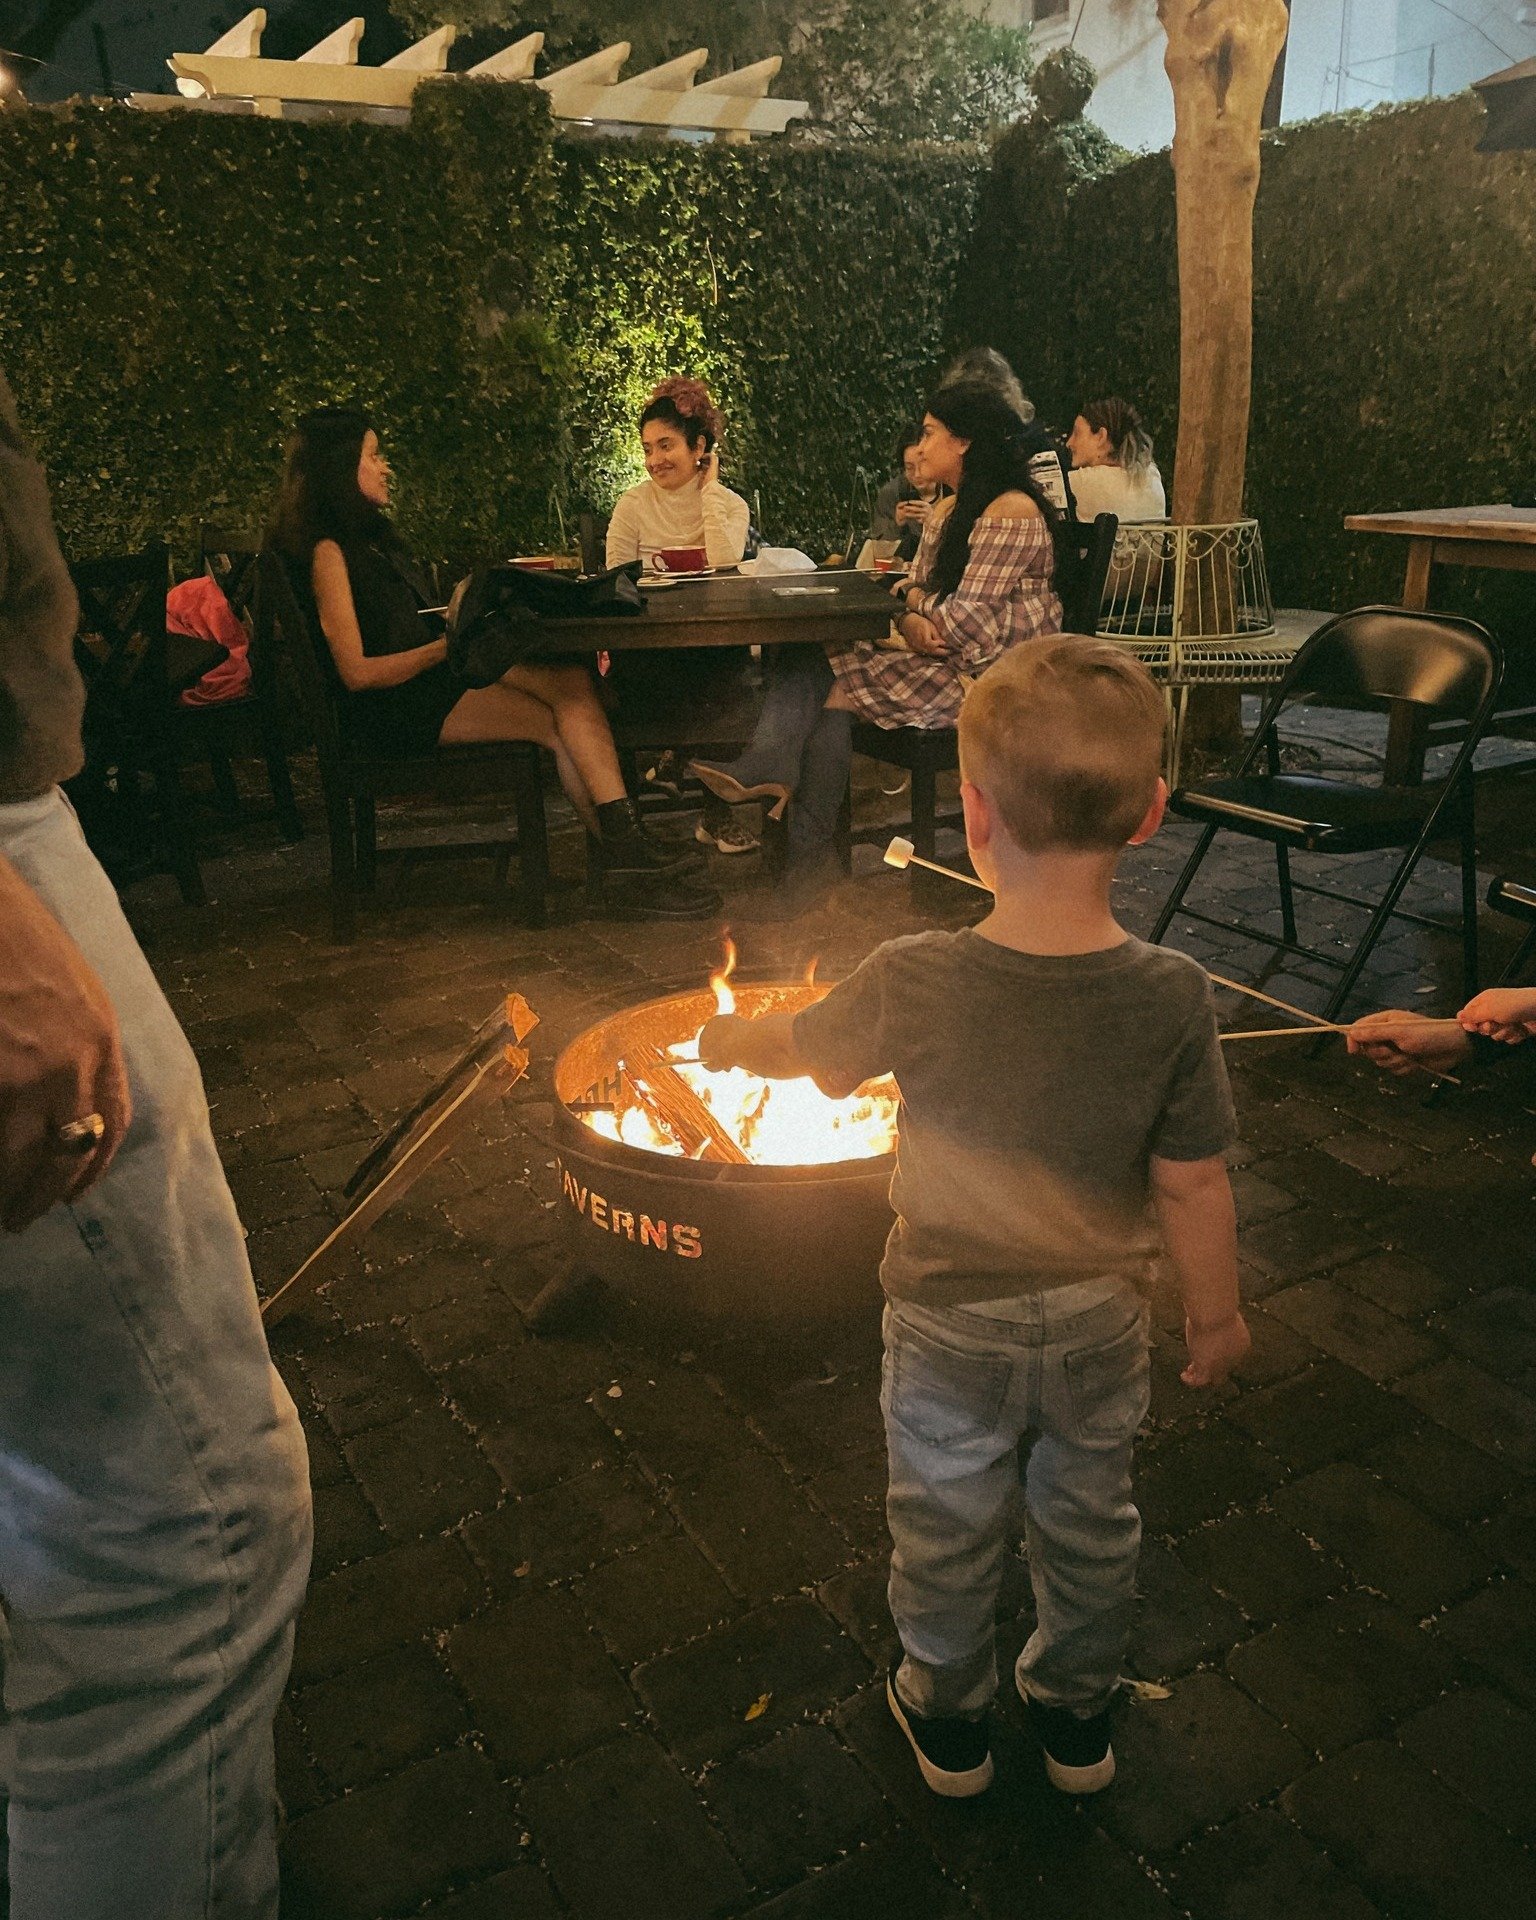 Join us for a family-friendly evening of fun at Fire &amp; Wine! From 6-9PM, cozy up by the fire pits, sip on half-priced bottles of wine for the adults, and enjoy complimentary marshmallows for everyone. Don't miss out on the chance to bond over s'm